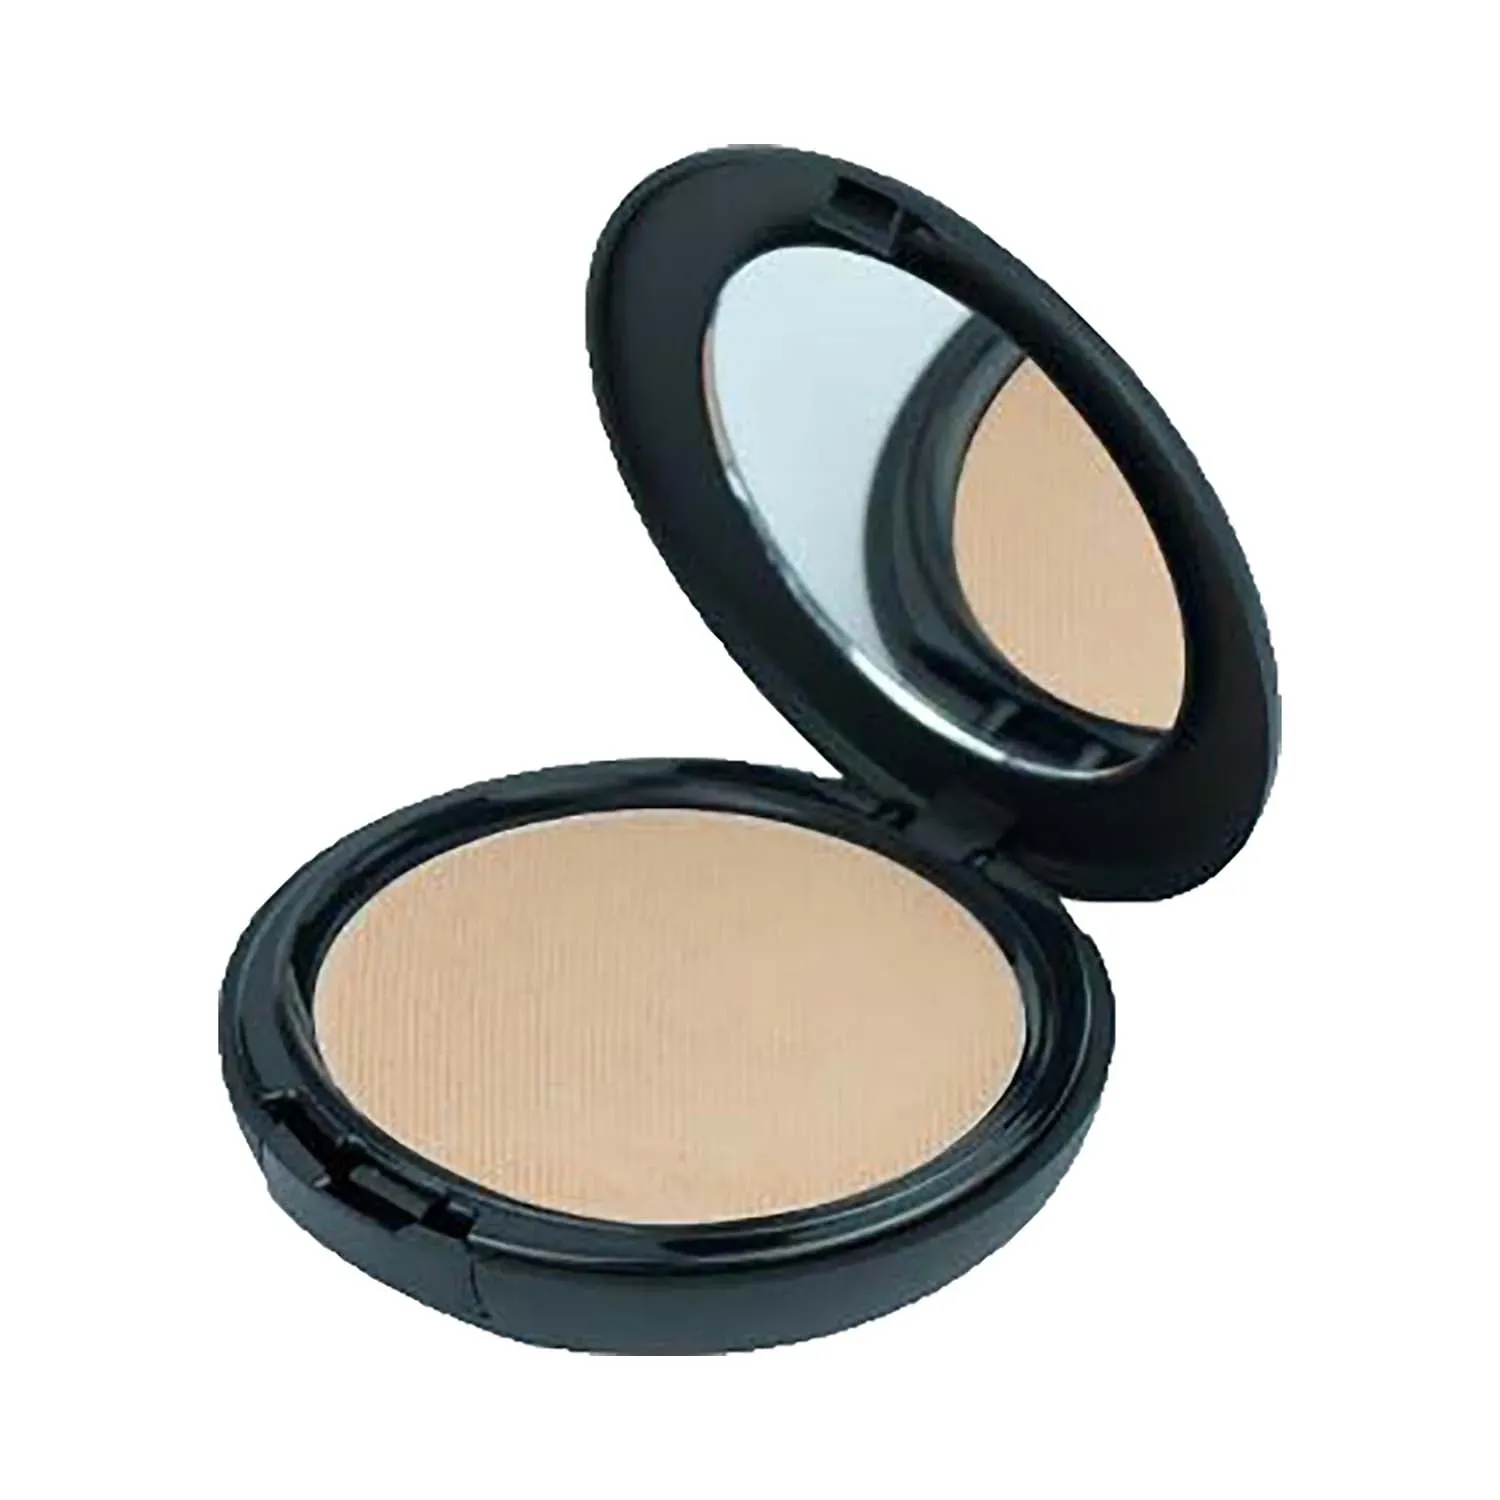 Faces Canada | Faces Canada Ultime Pro Expert Cover Compact - 01 Ivory (9g)